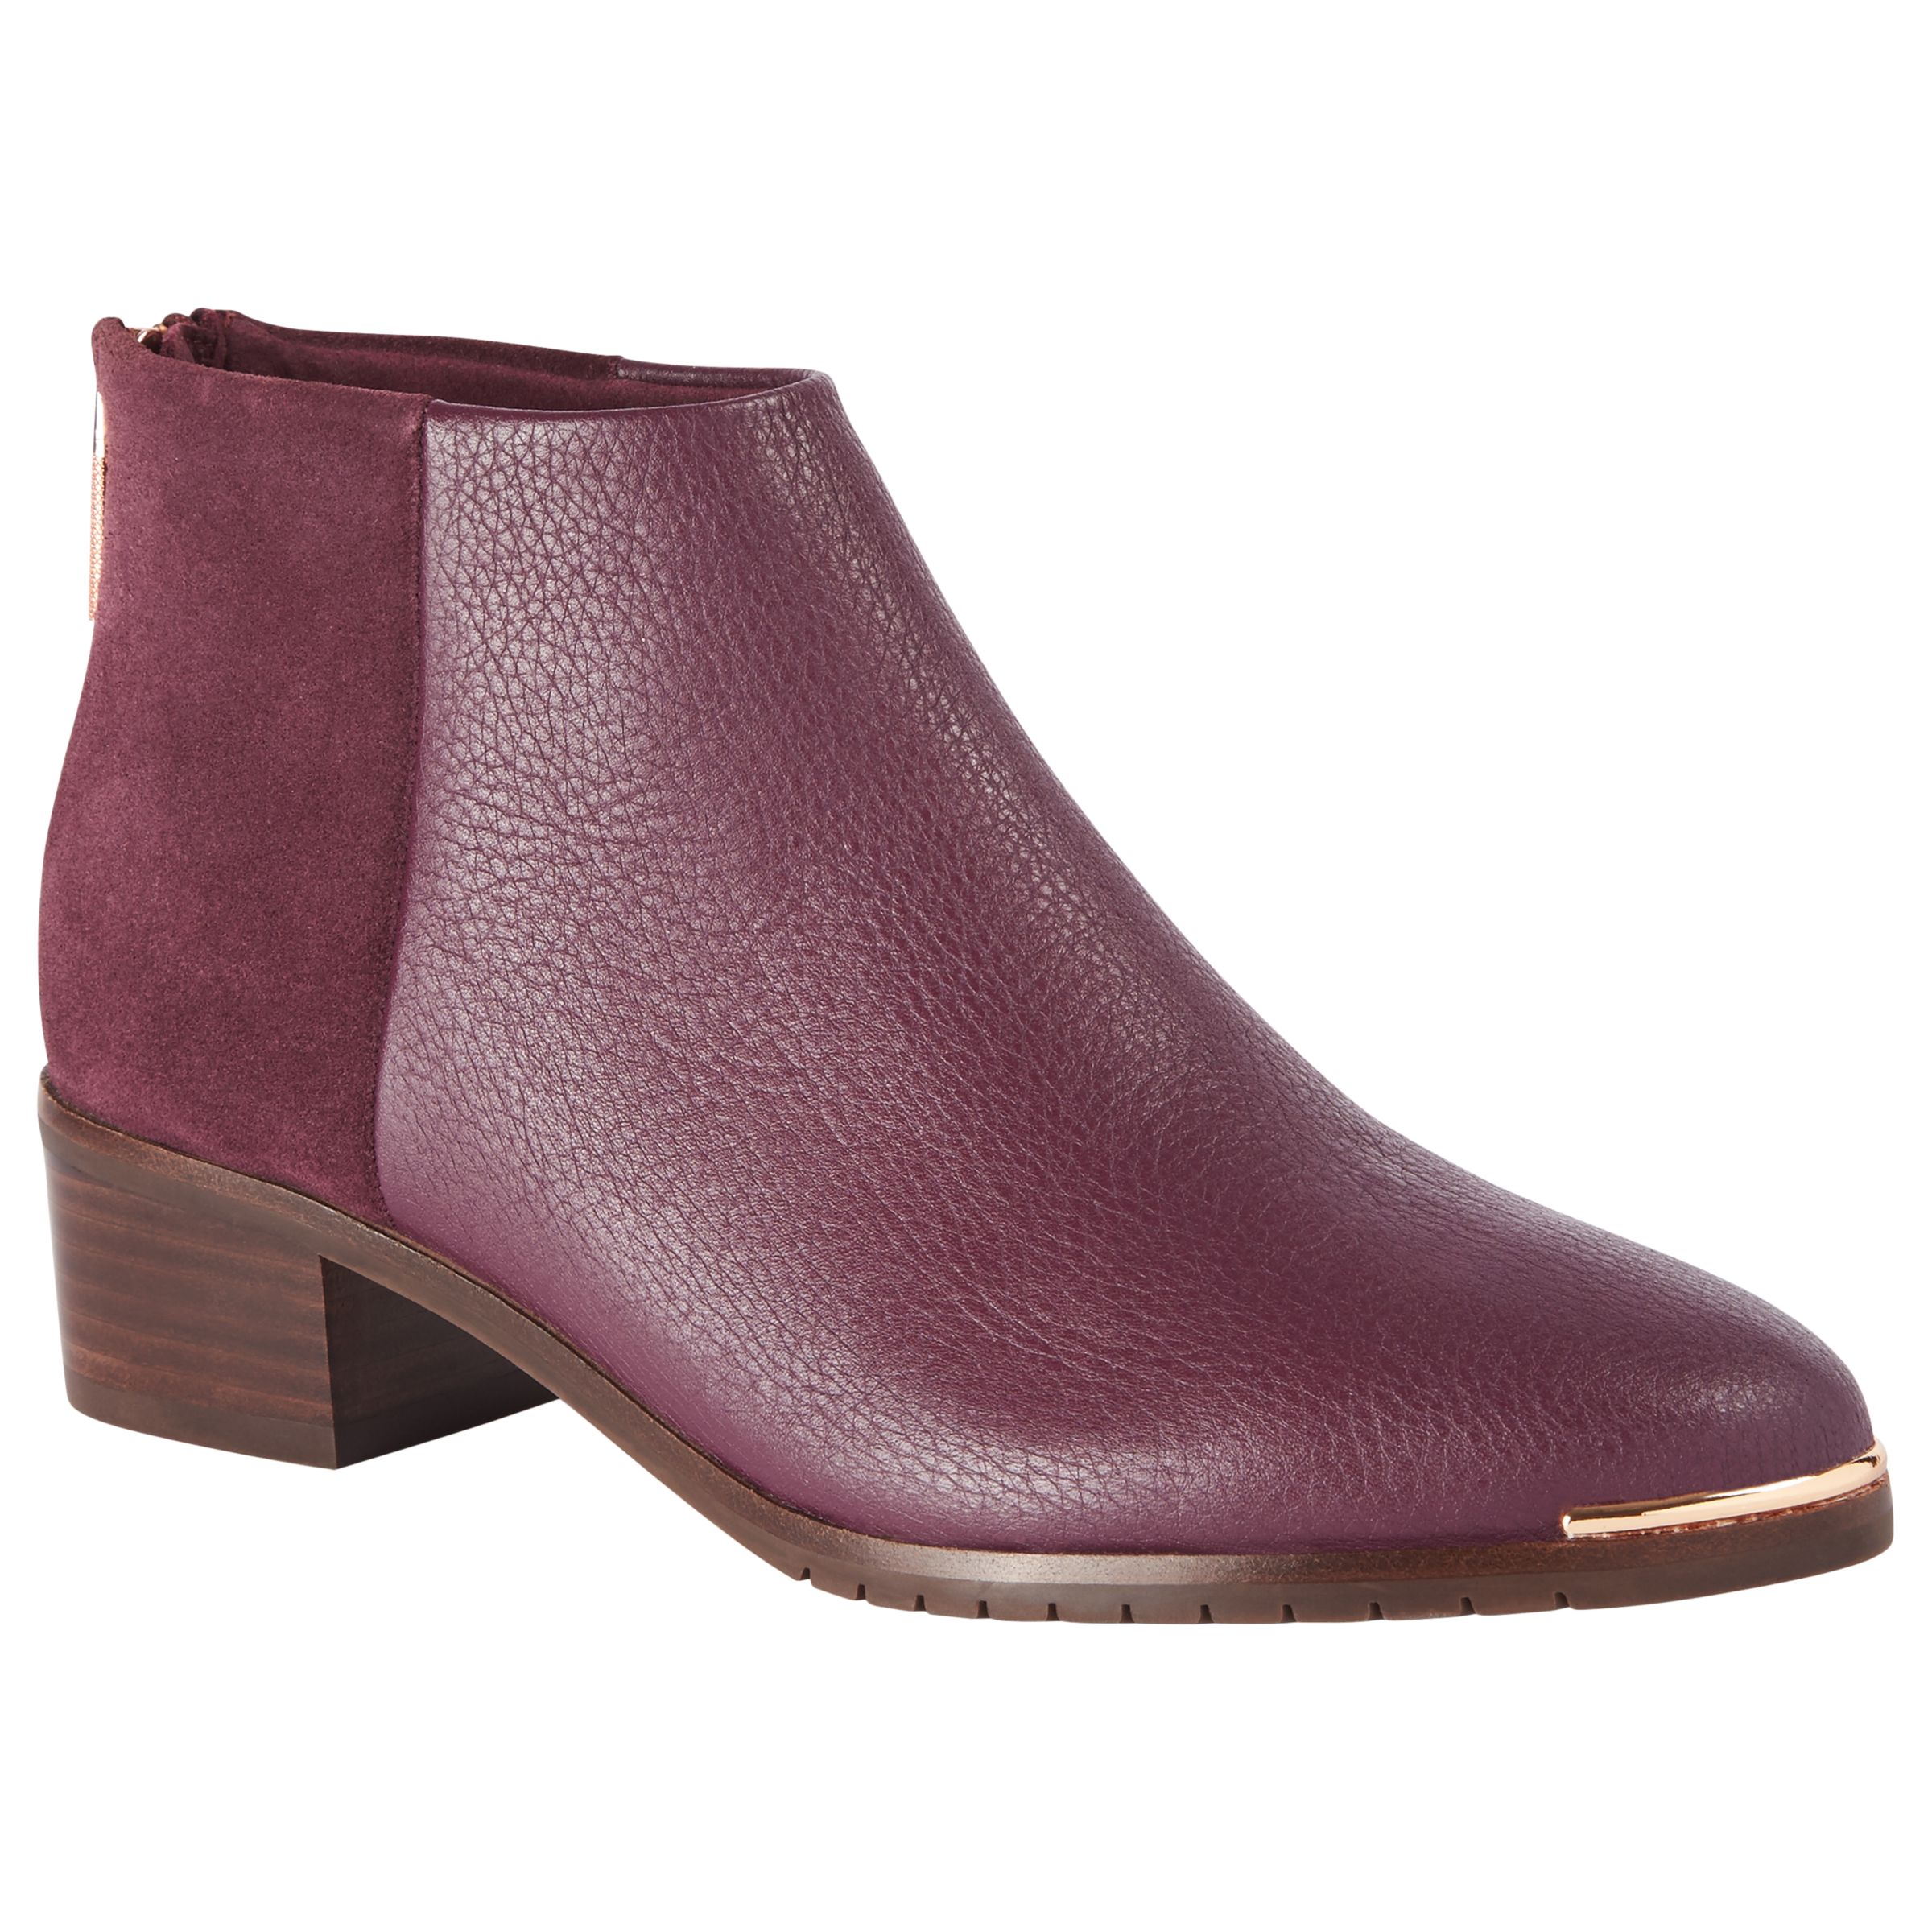 Ted Baker Sasybell Faux Fur Lined Block Heel Ankle Boots, Burgundy, 6